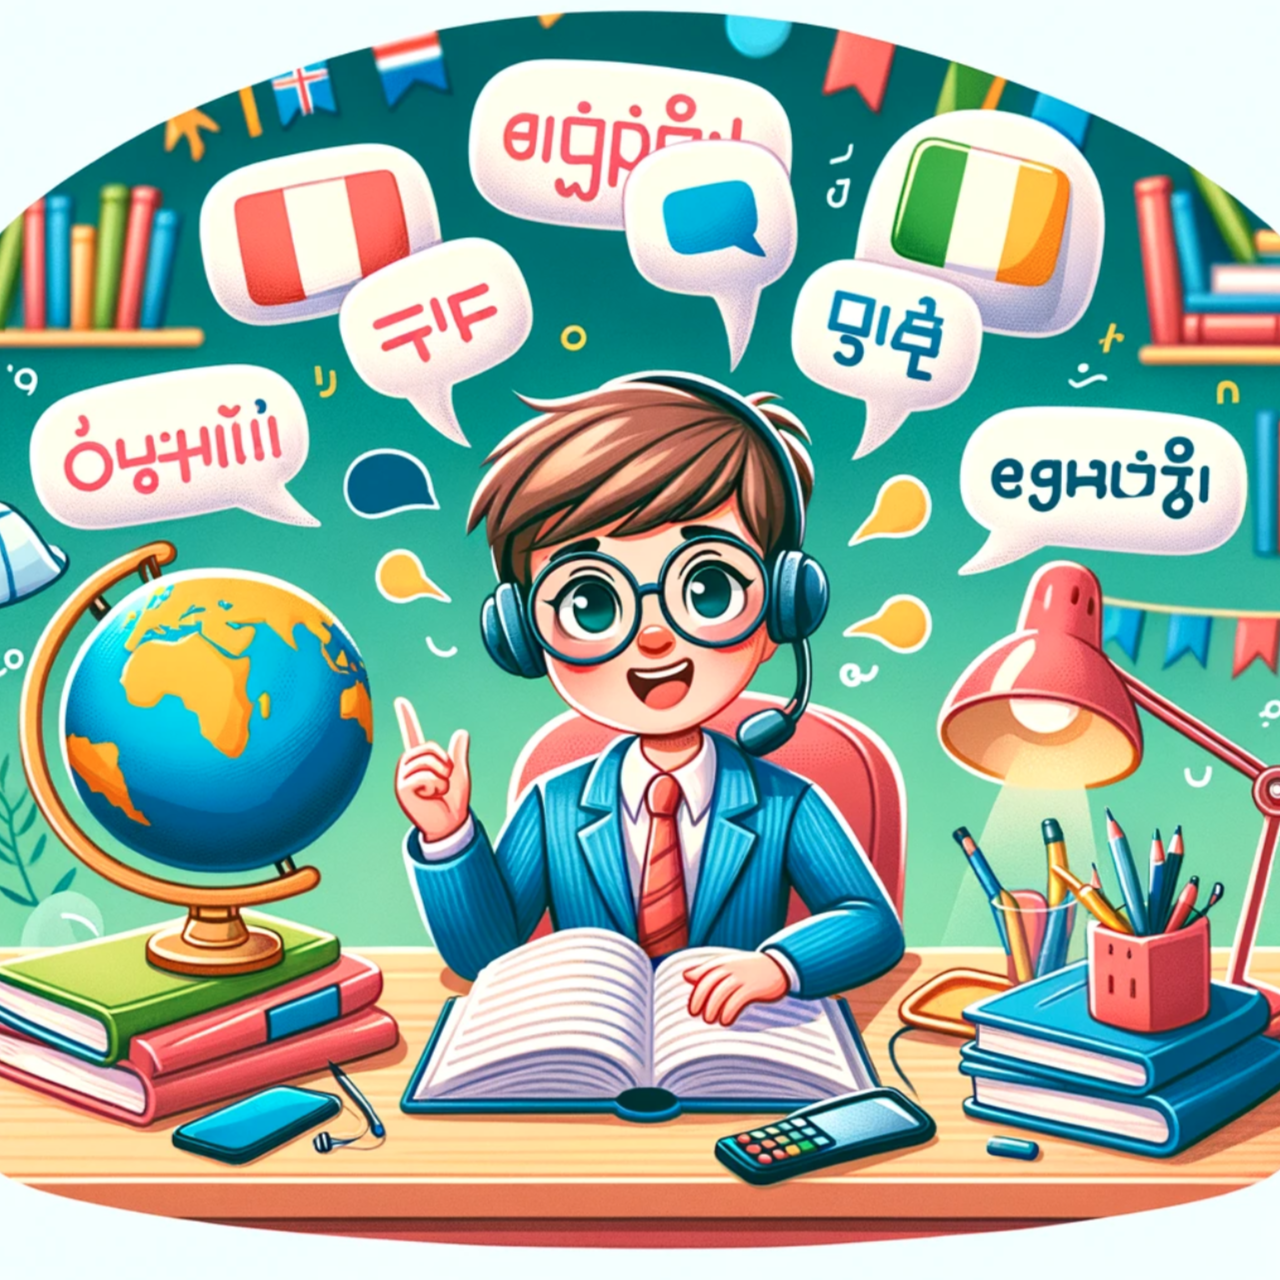 Here is a cartoon image depicting the concept of learning a new language. The character in the image is surrounded by various language learning materials, creating a colorful and engaging scene that represents the fun and positive aspects of language learning.